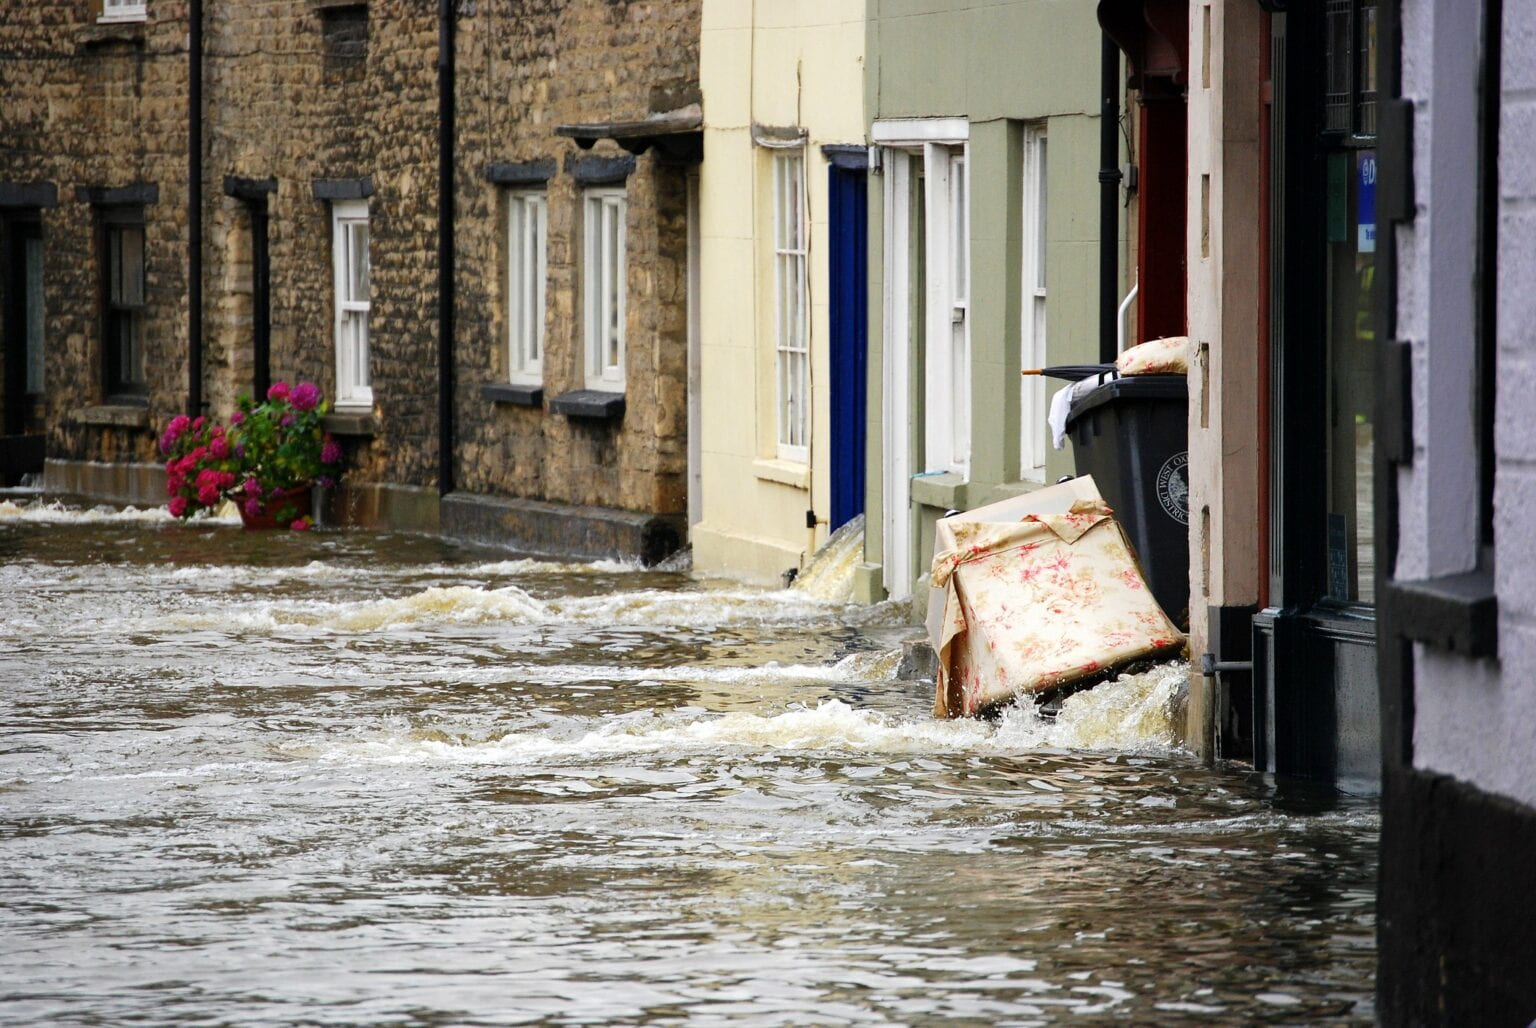 Flooding on a street in Whitley; Image via dachalan on Flickr (CC BY-NC-SA 2.0).